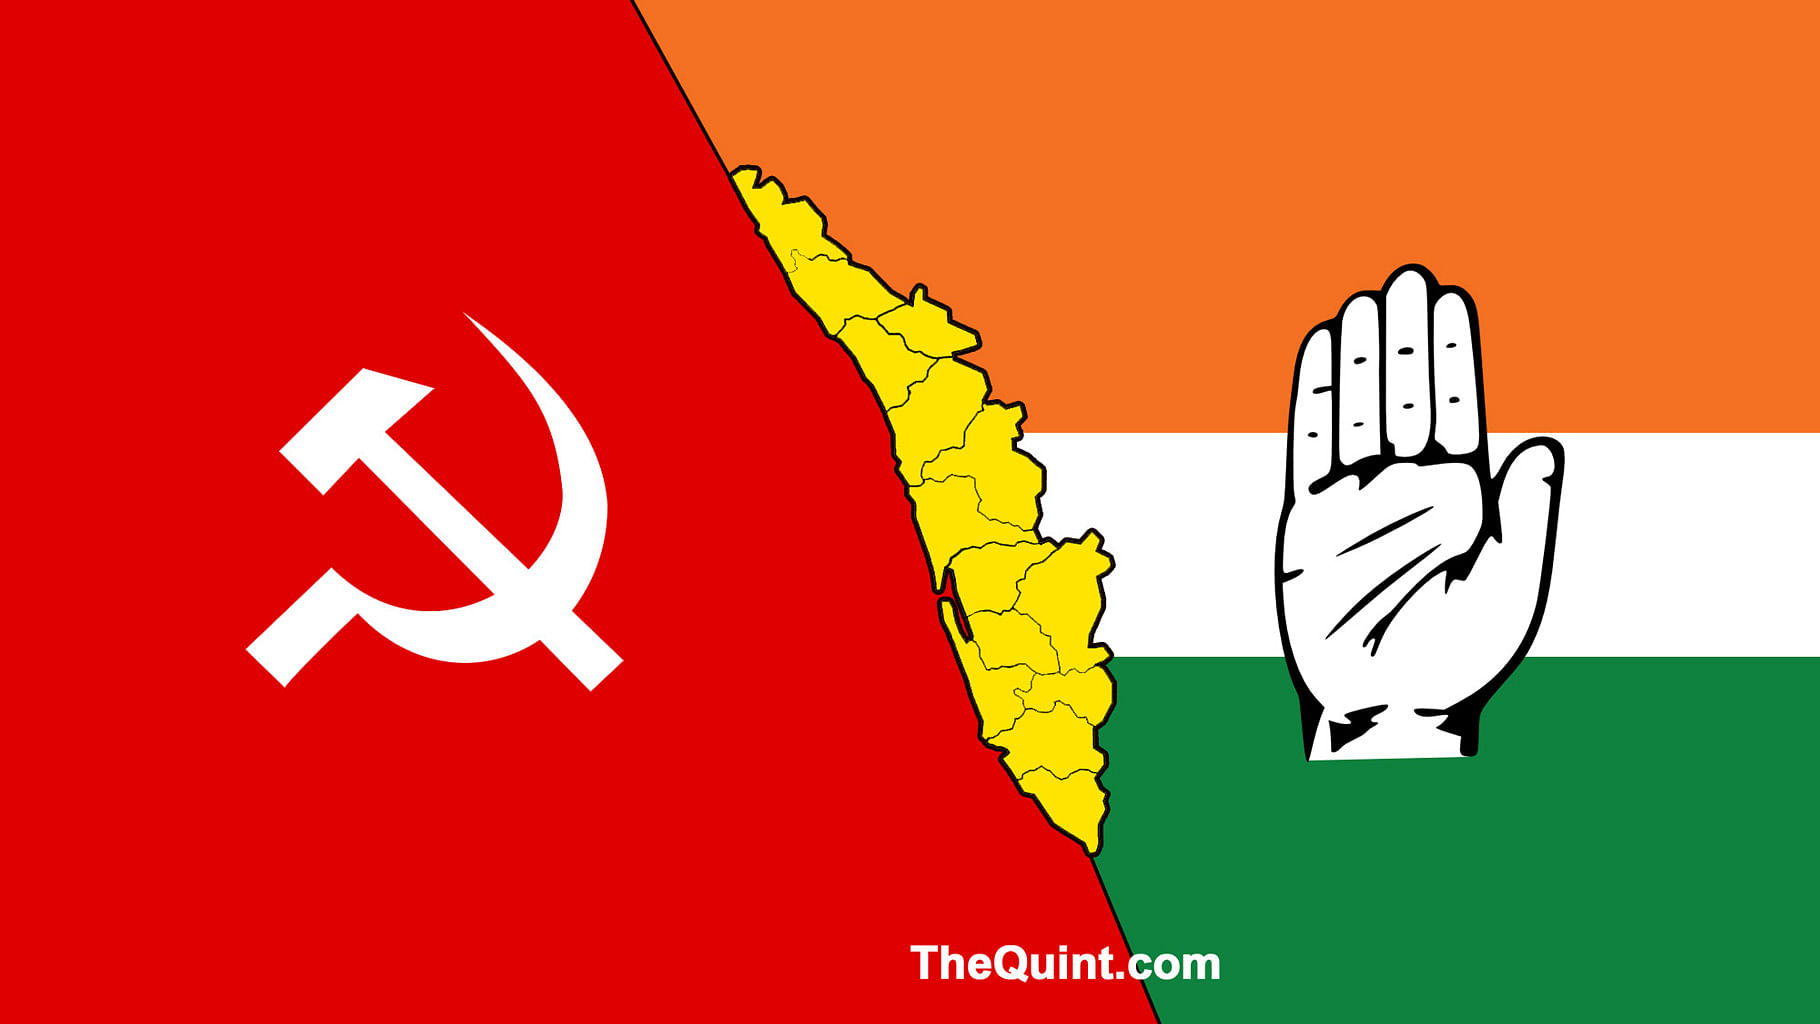 All you need to know before the general elections on 16 May 2016. (Photo: <b>The Quint</b>)